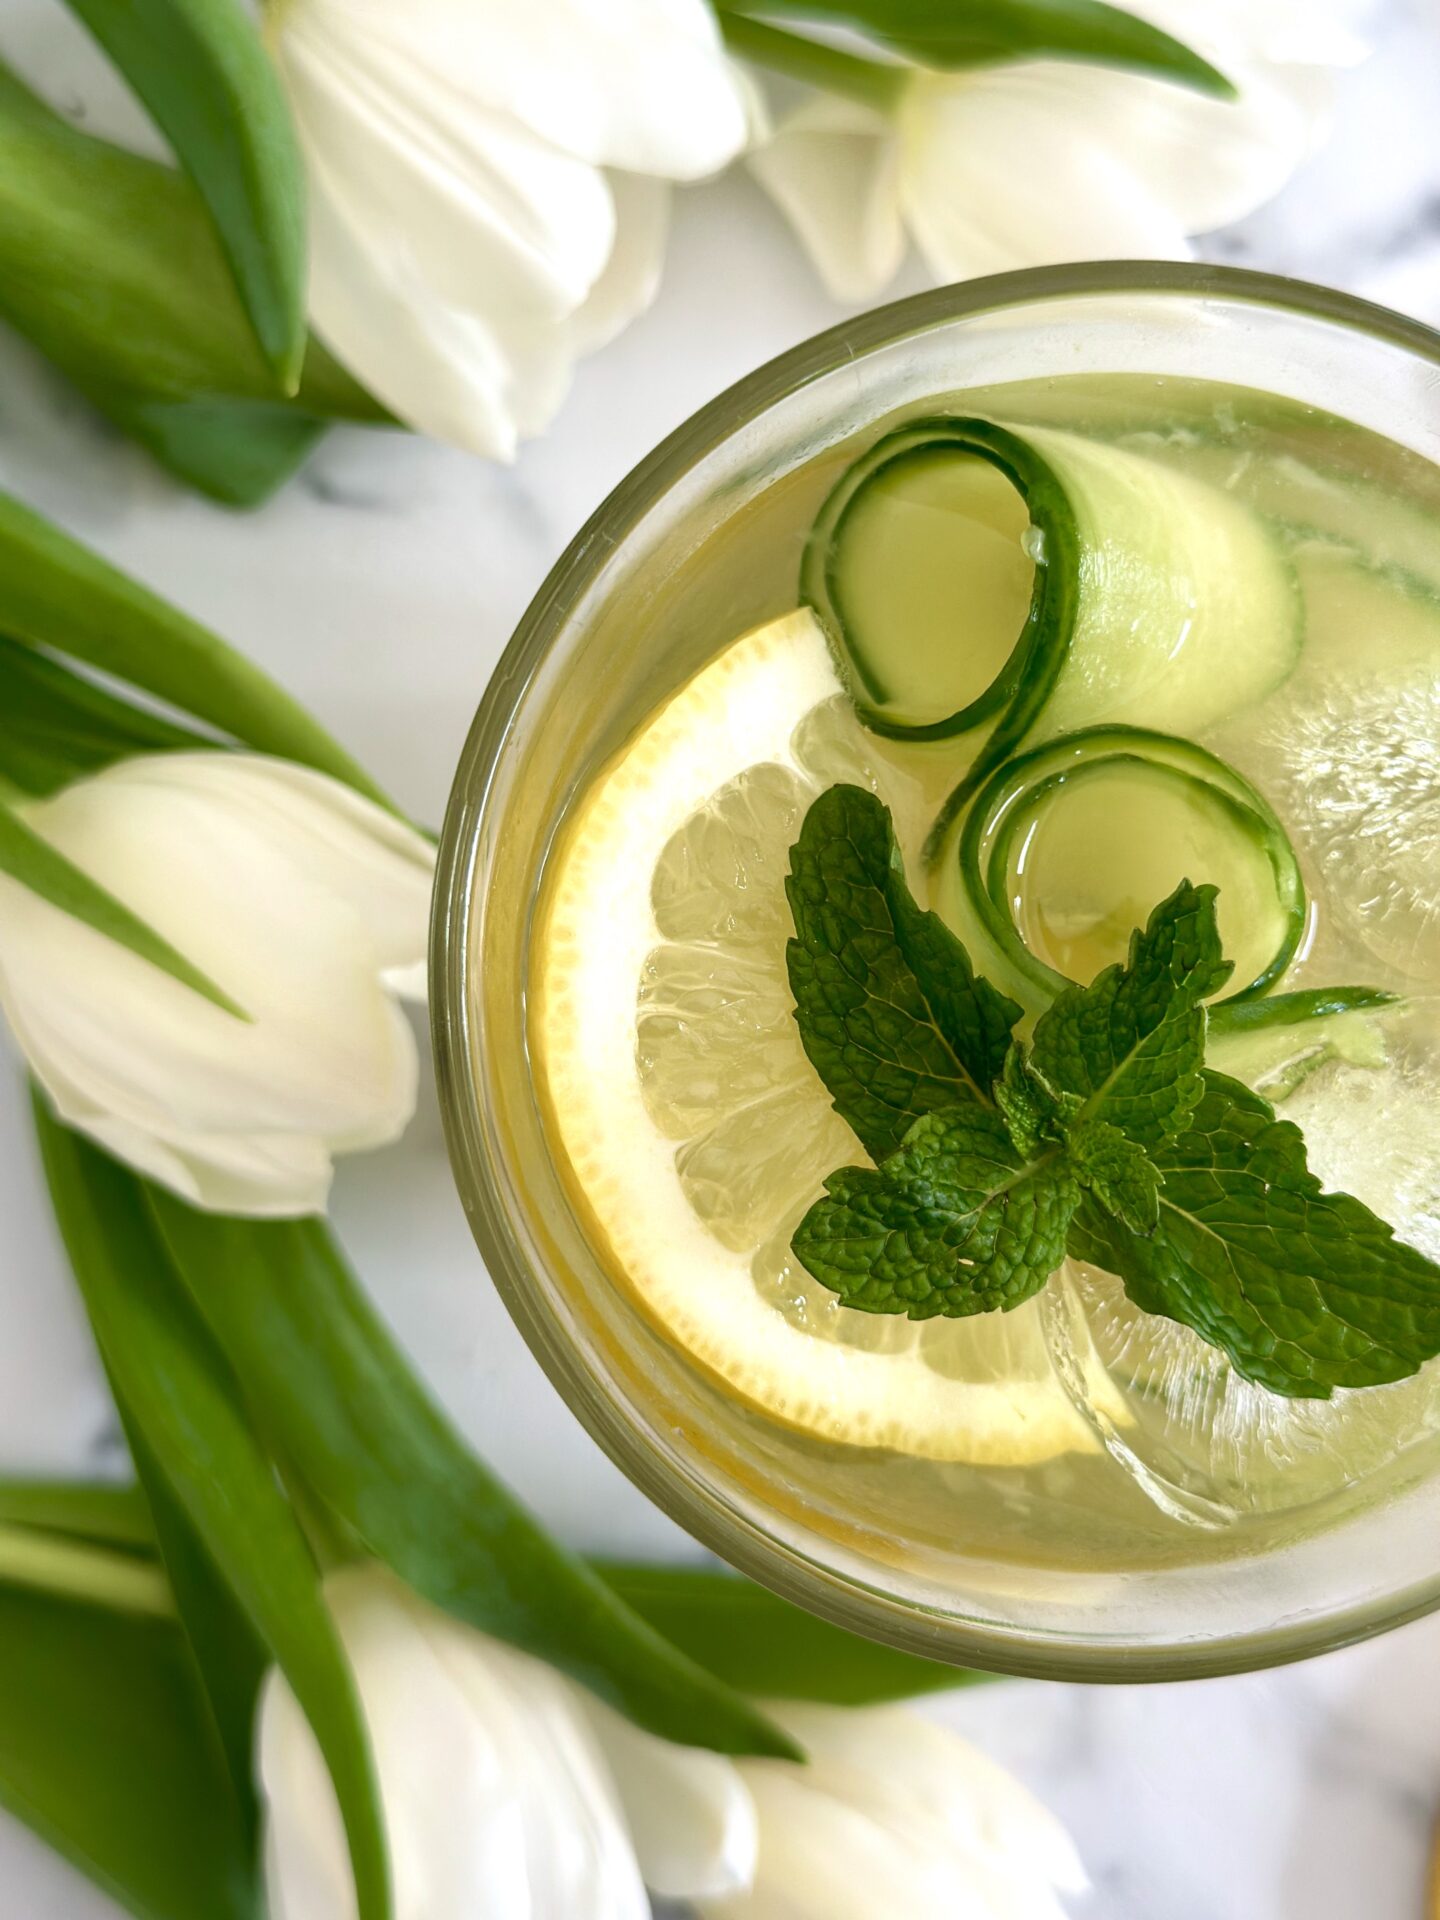 An Irish Maid Cocktail is seen from above garnished with cucumber curls, lemon slices and fresh mint and surrounded by white tulips